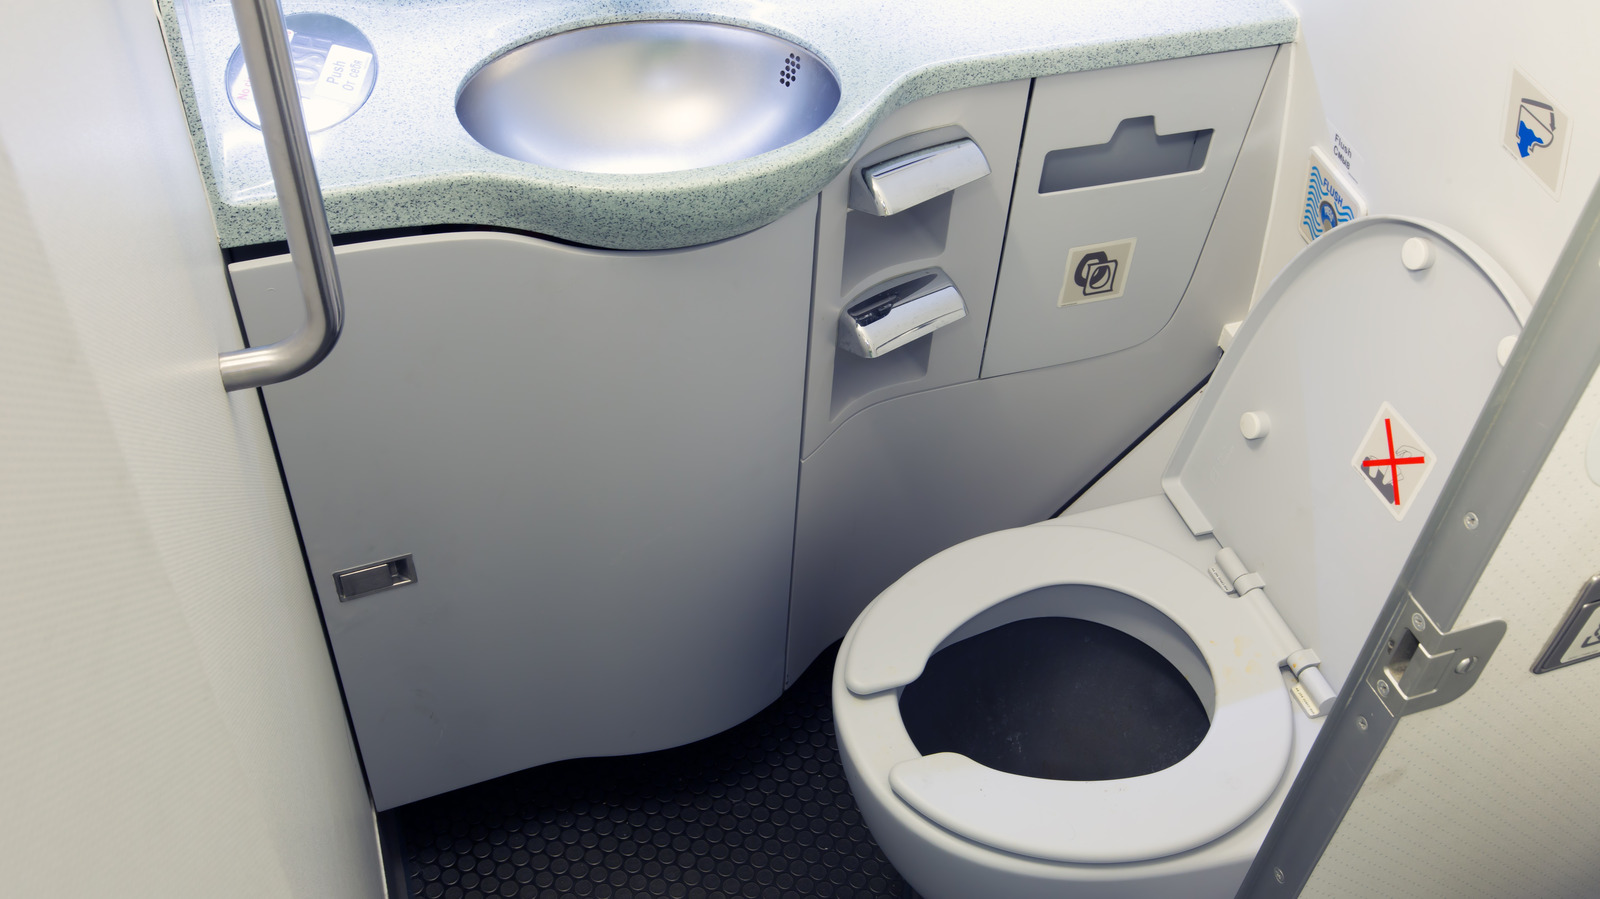 One Item You Should Never Use A Plane’s Restroom Without, According To A Flight Attendant – Explore